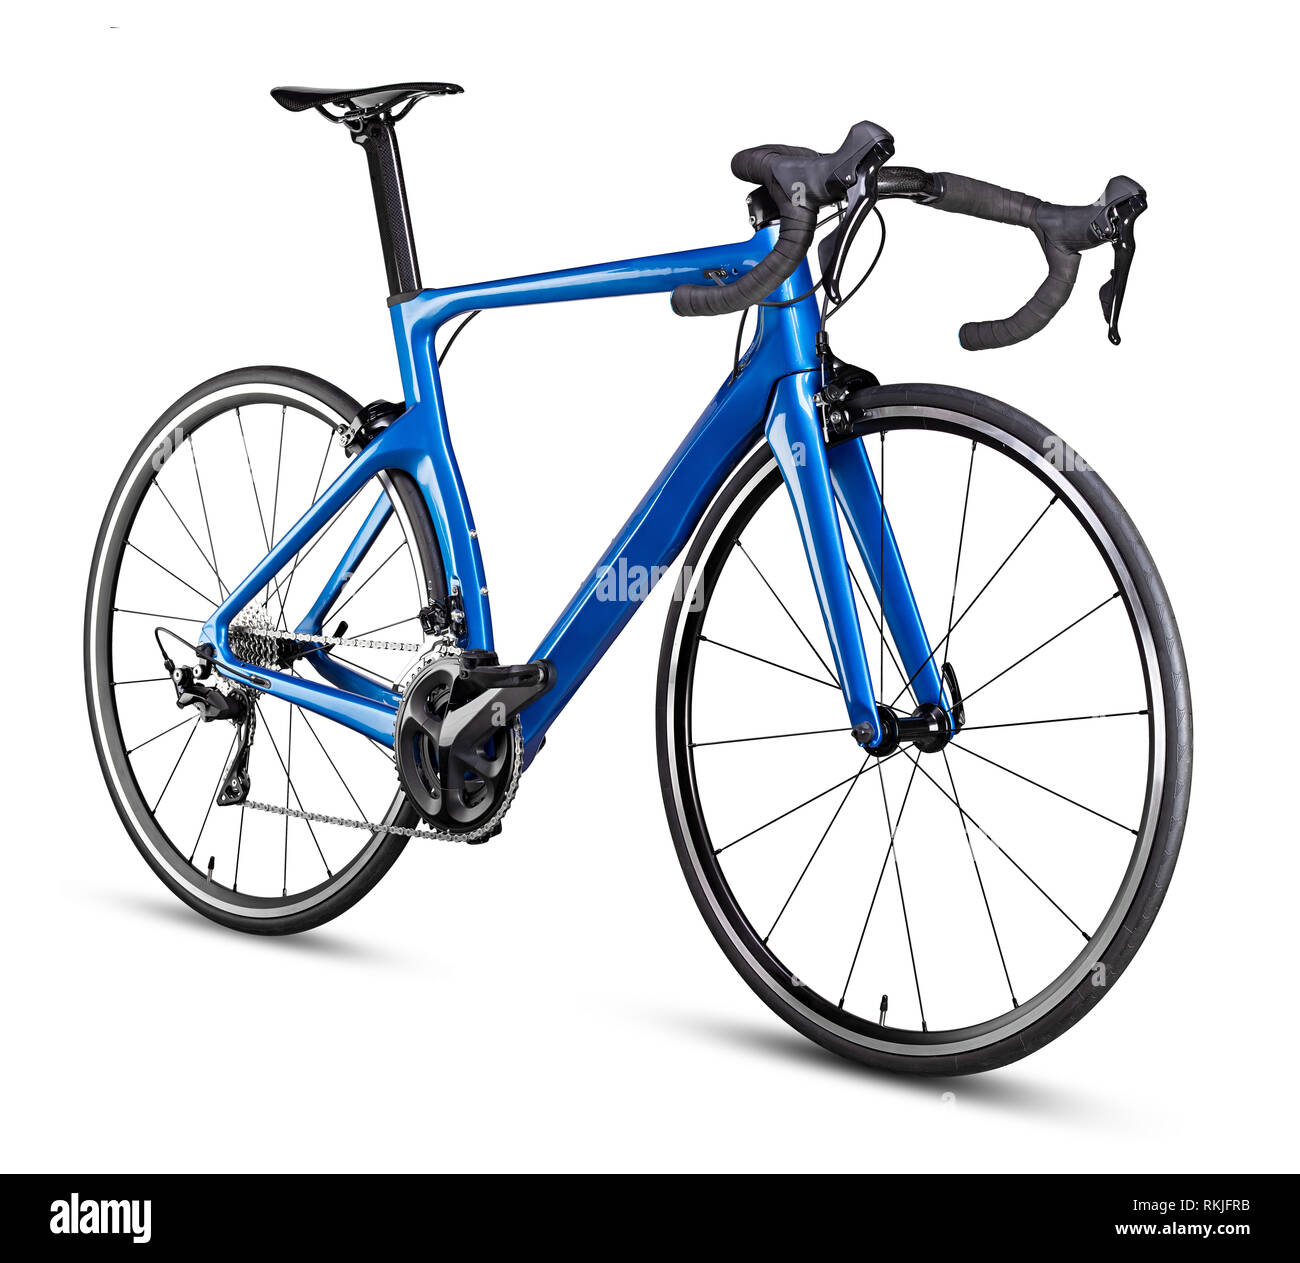 blue black modern aerodynmic carbon fiber racing sport road bike bicycle racer isolated on white background Stock Photo